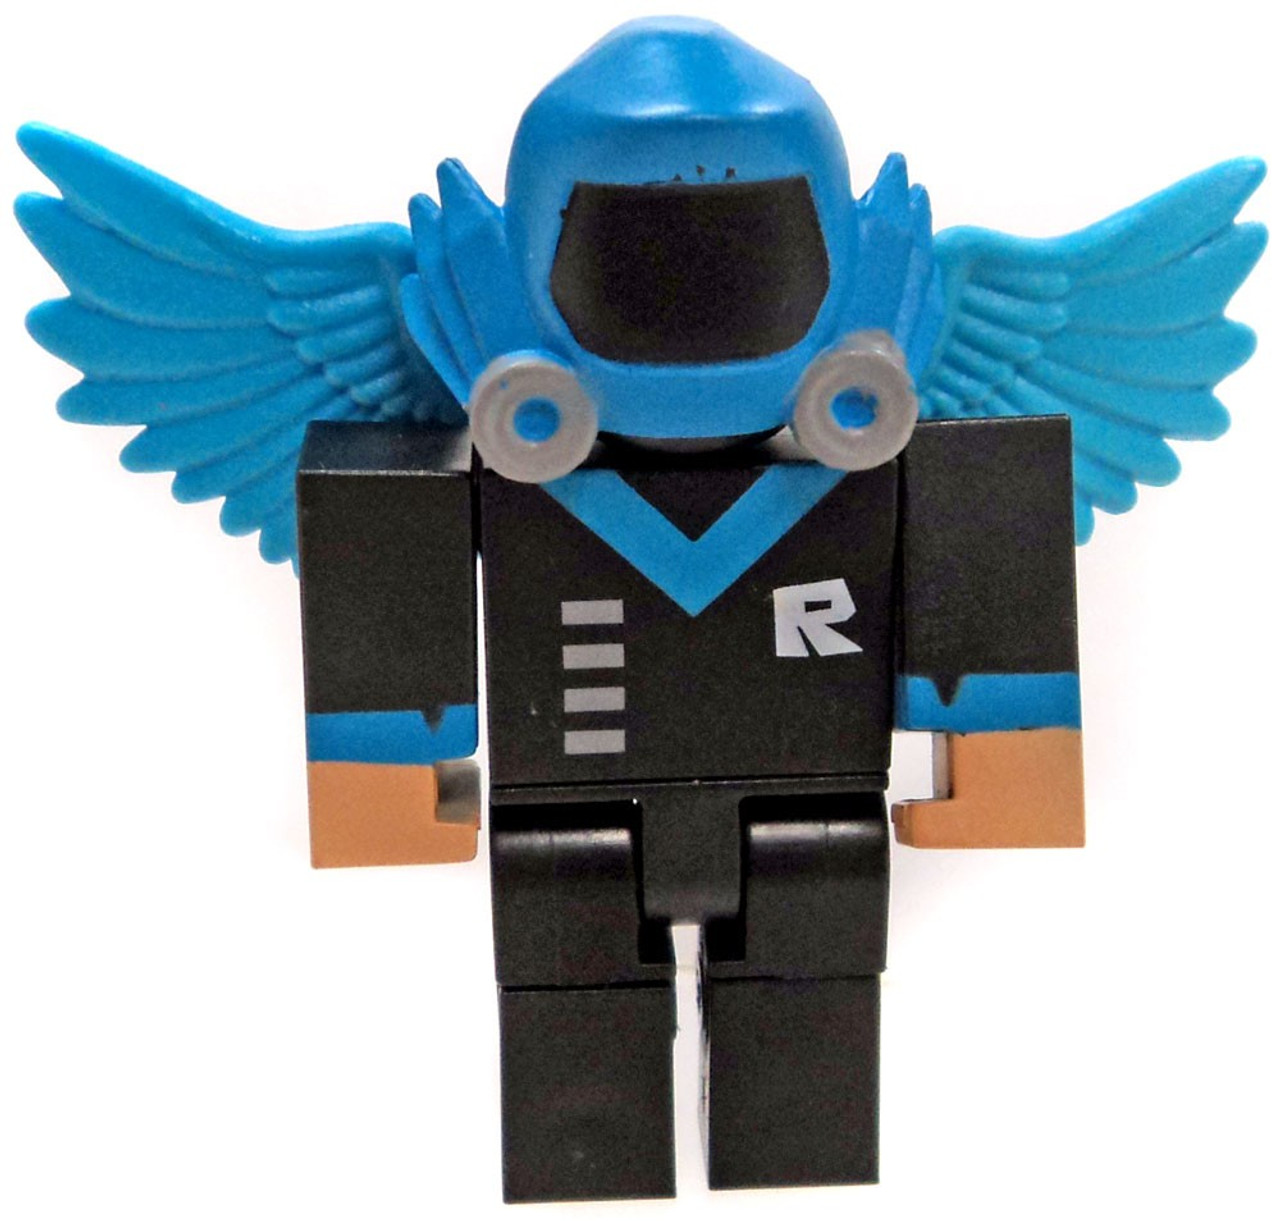 Overseer Wings Codes For Roblox Free Robux Hack That Works 2018 Crf450 - roblox wing codes